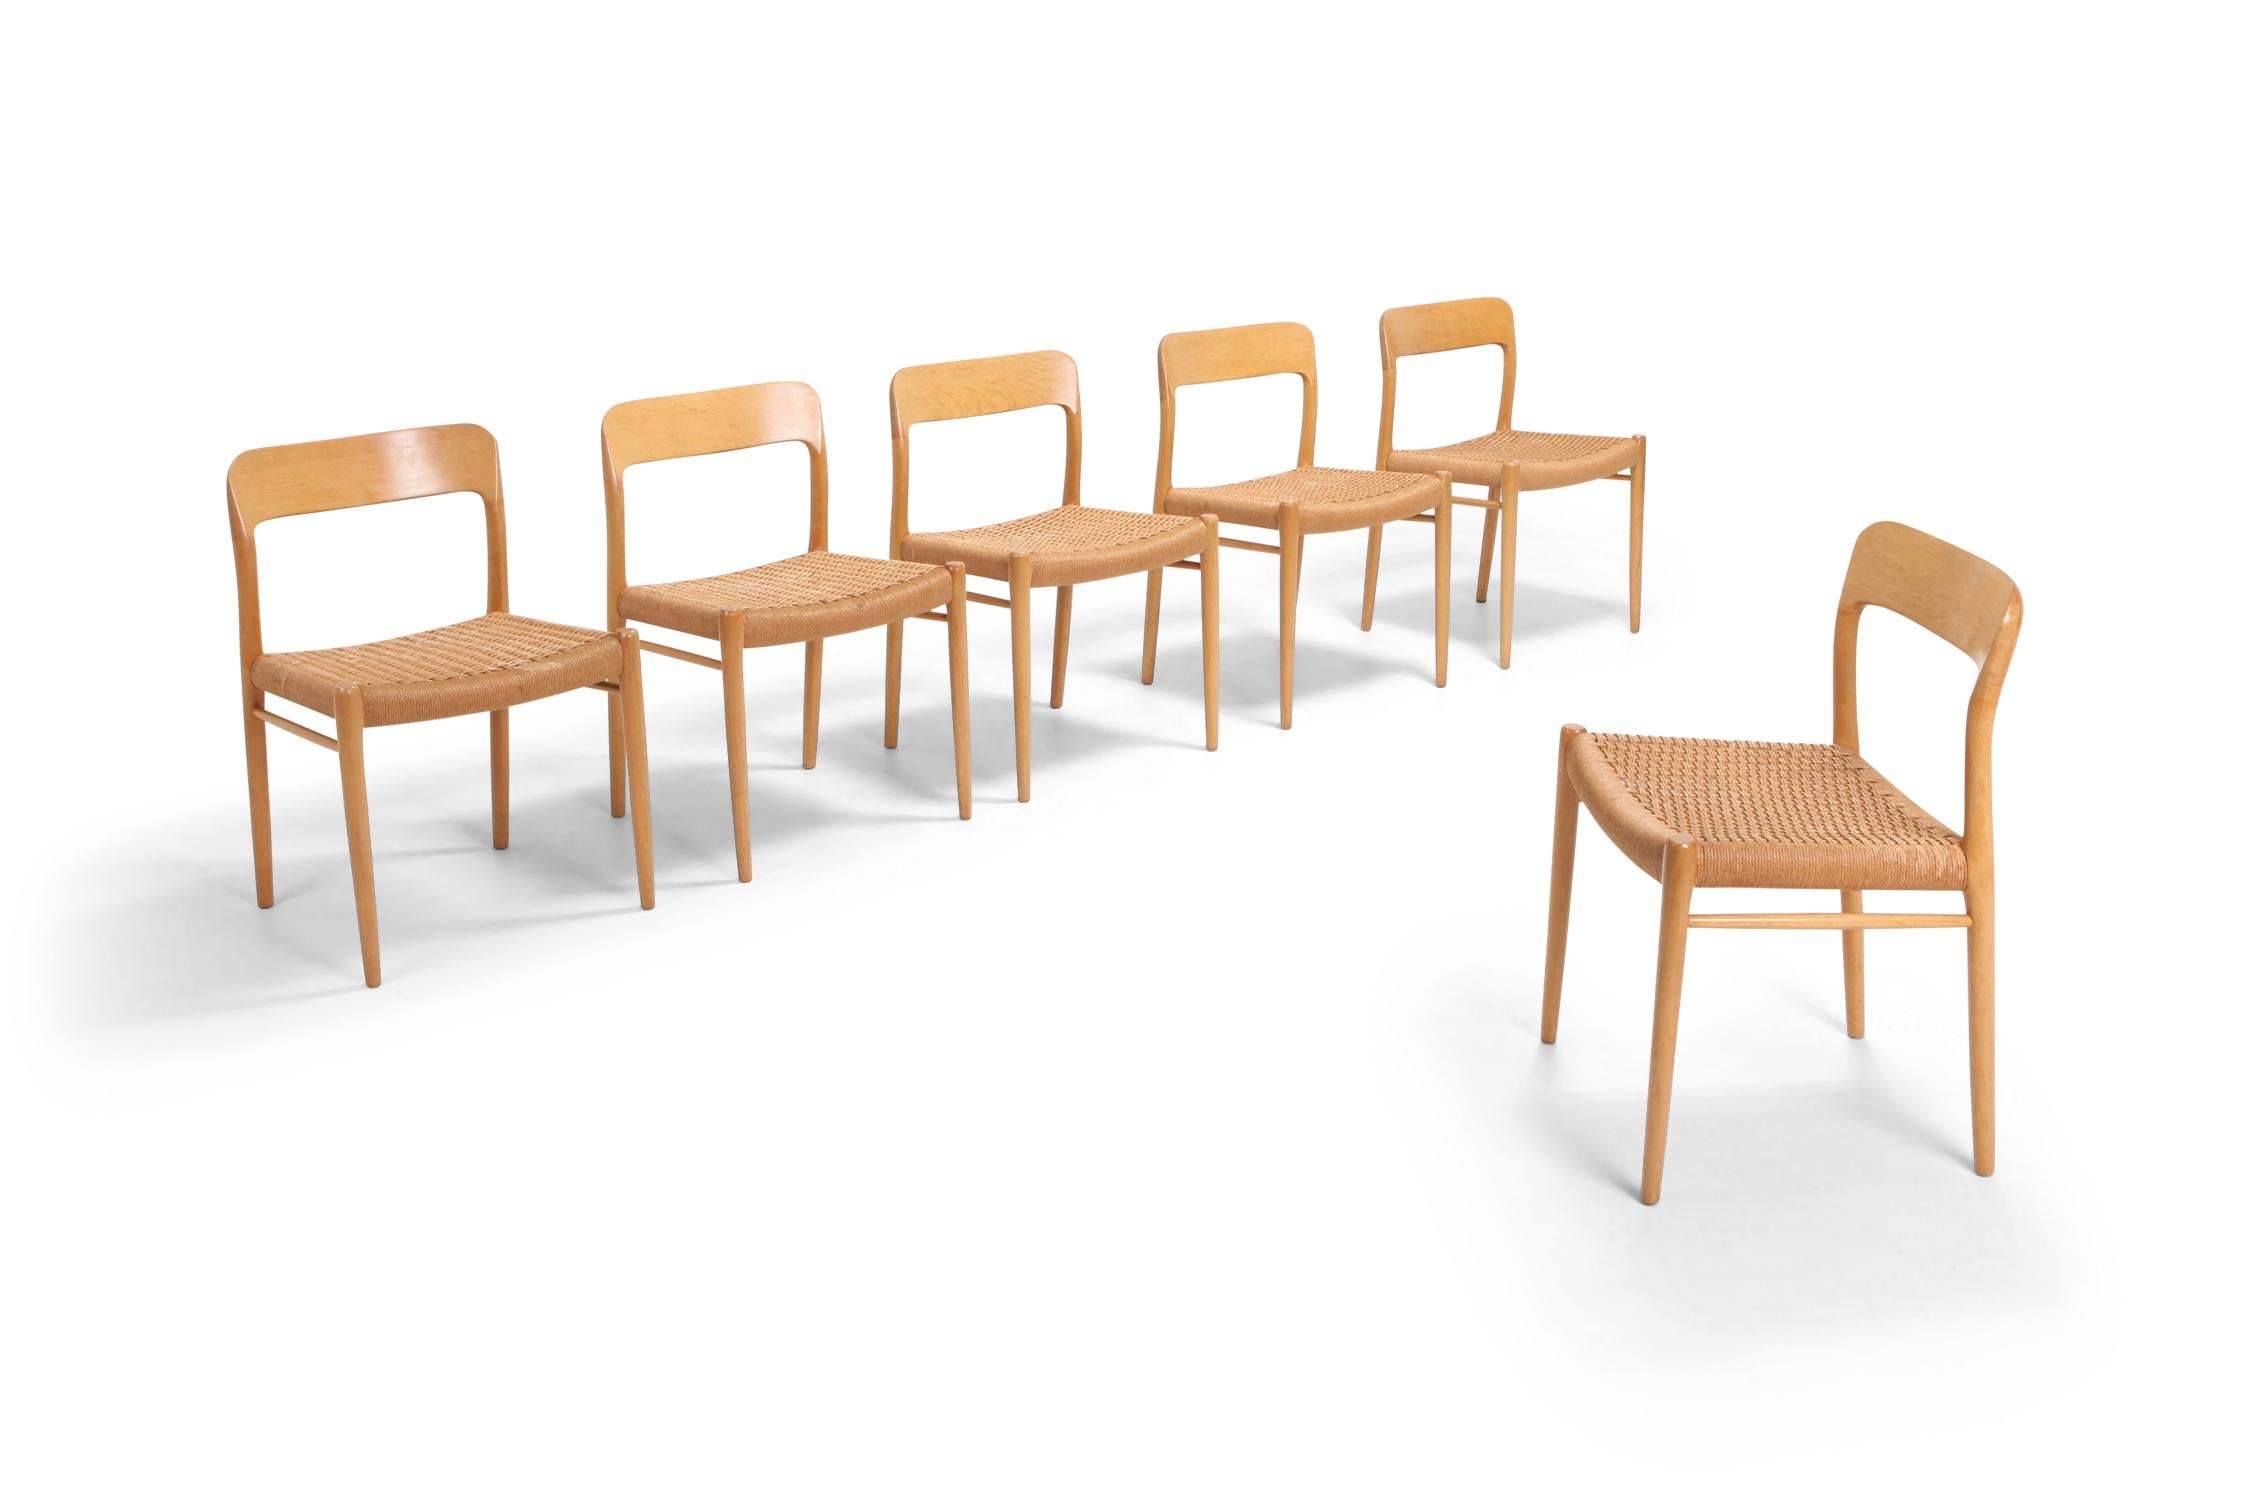 Model 75 chairs by Danish designer Niels Otto Møller, and manufactured by JL Møllers Møbelfabrik 
This is a rare edition in oak and with seating made of paper cord. 
Condition: The chairs are offered in excellent original condition with only minor